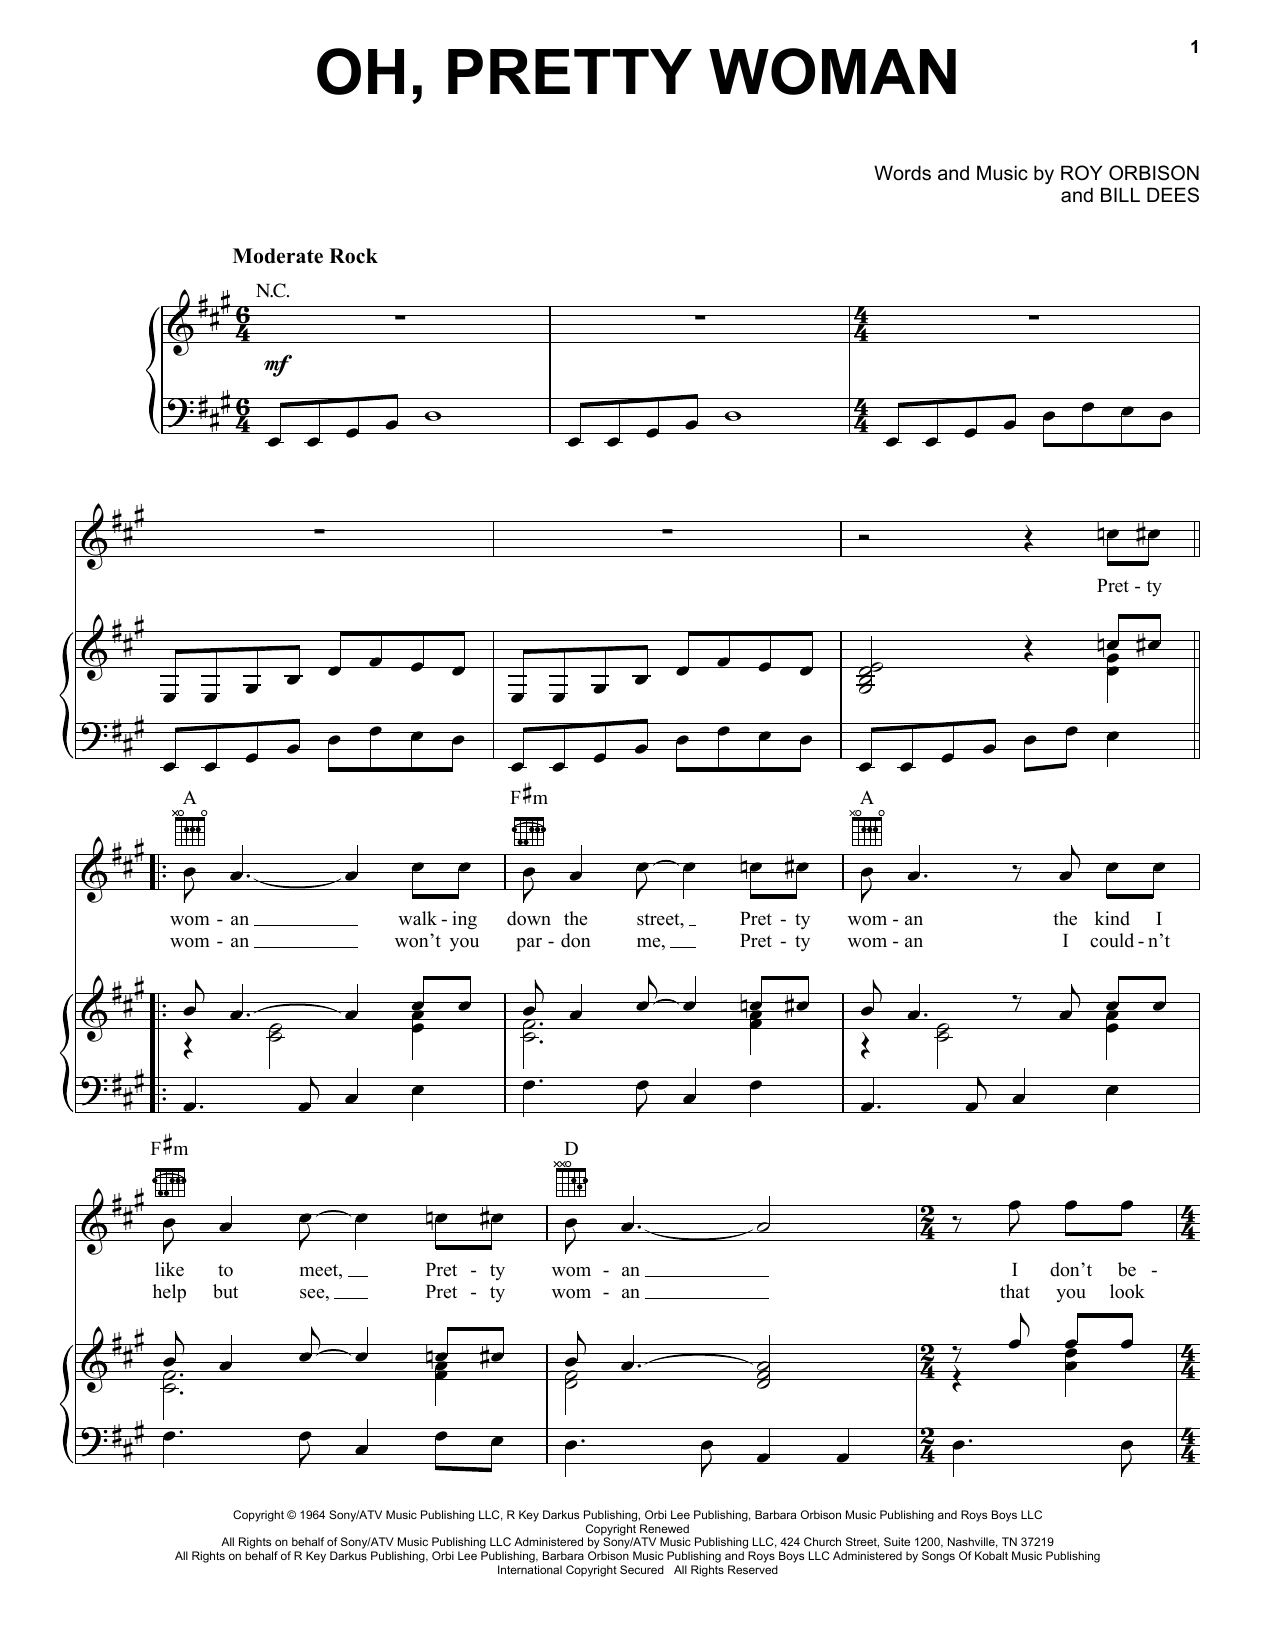 Roy Orbison Oh, Pretty Woman sheet music notes and chords. Download Printable PDF.